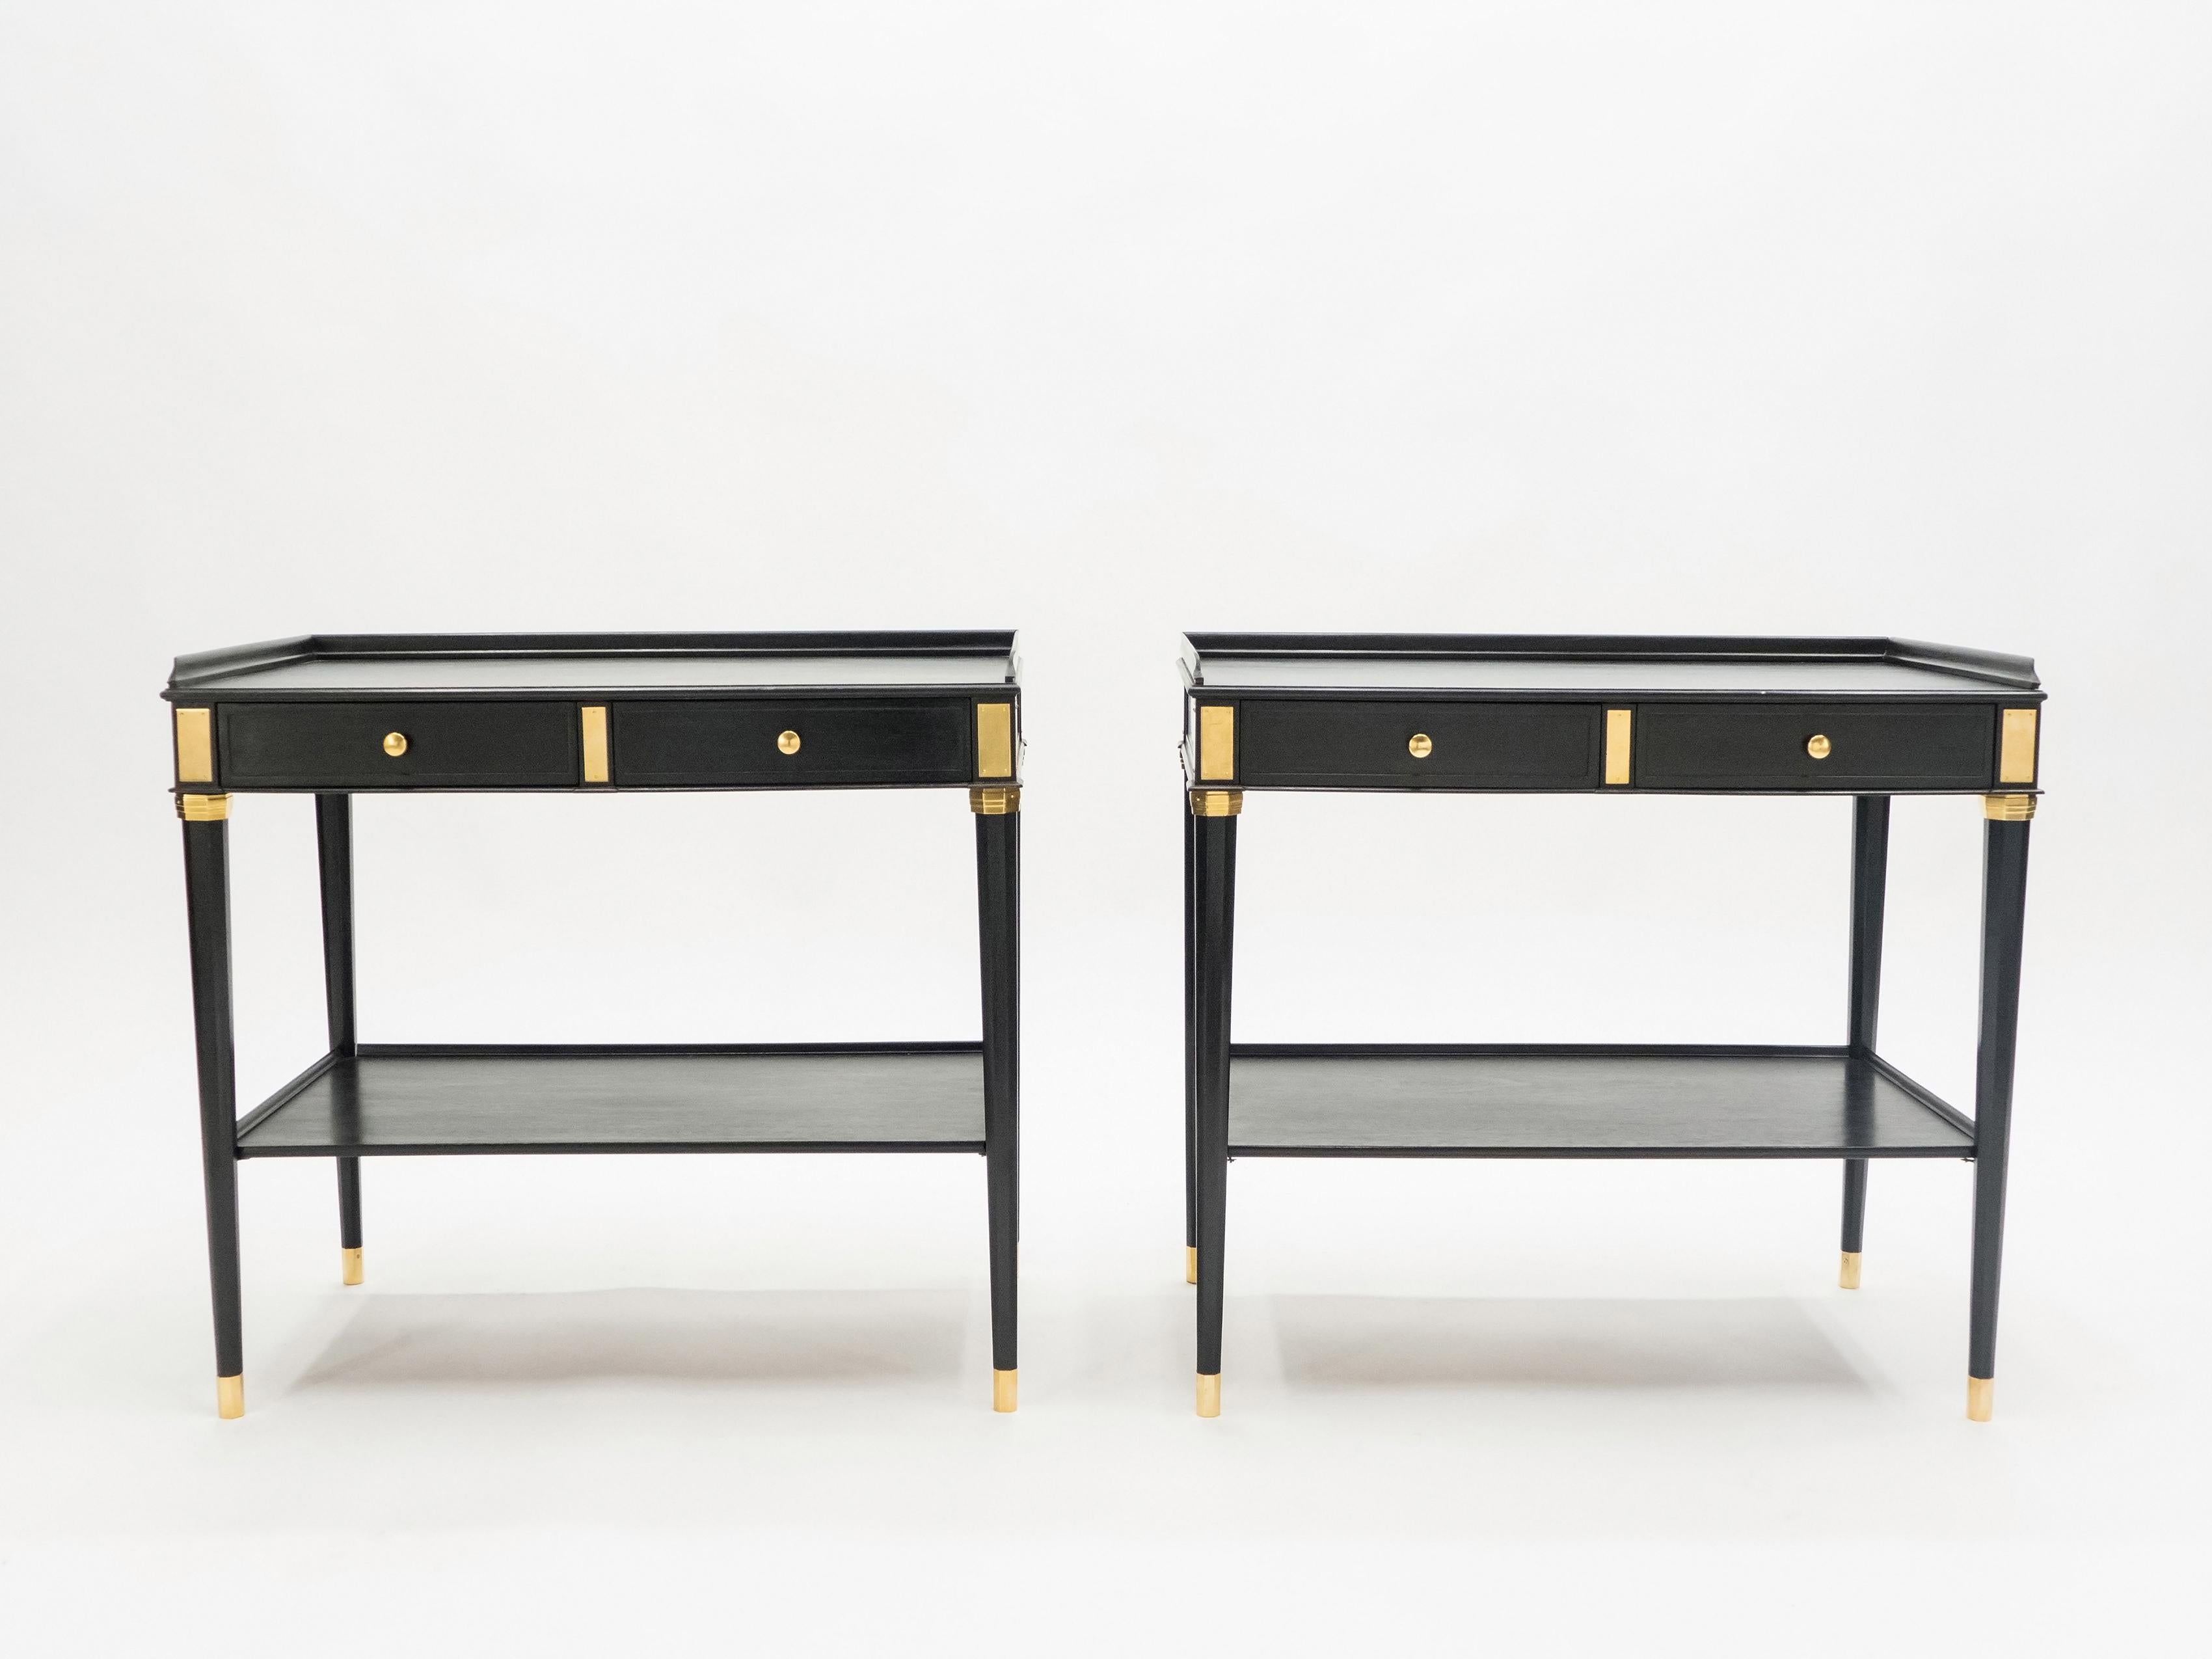 This rare pair of two-tier end tables or side tables by French house Maison Jansen was created in the early 1950s with black varnished mahogany wood, and brass details and accents. Typical and timeless French neoclassical style from Maison Jansen,